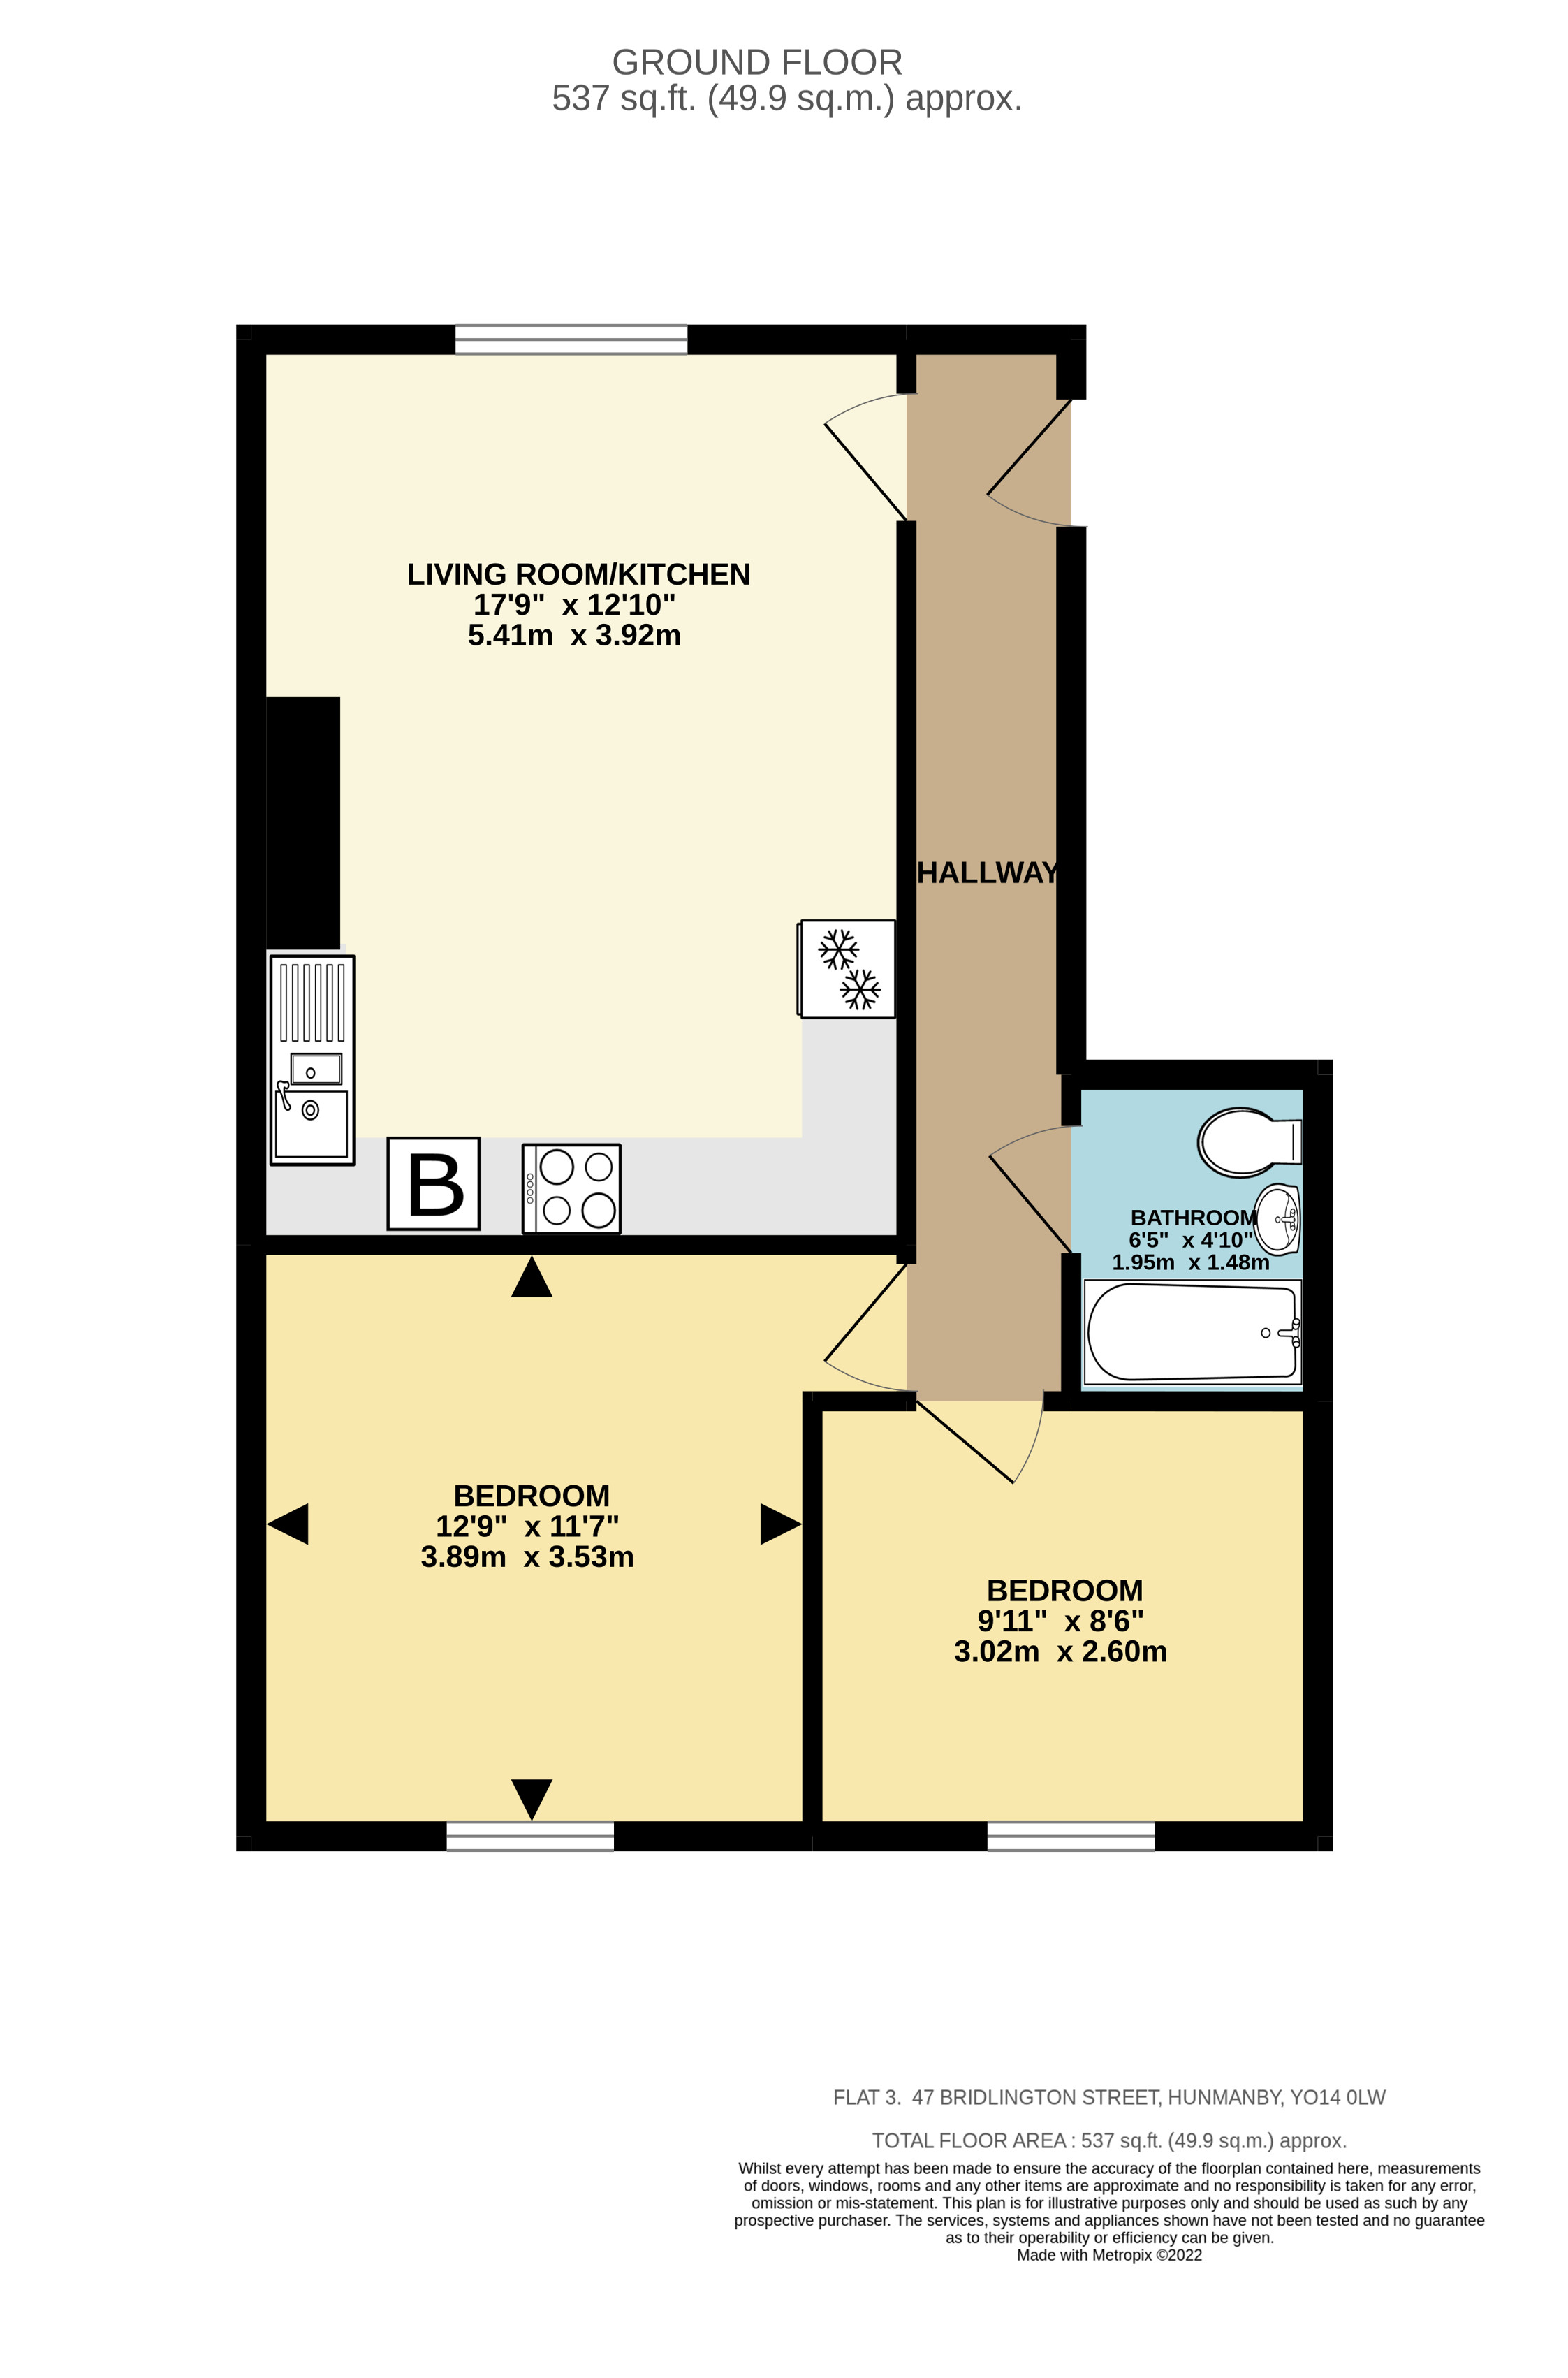 2 bed apartment for sale in Bridlington Street, Hunmanby - Property floorplan